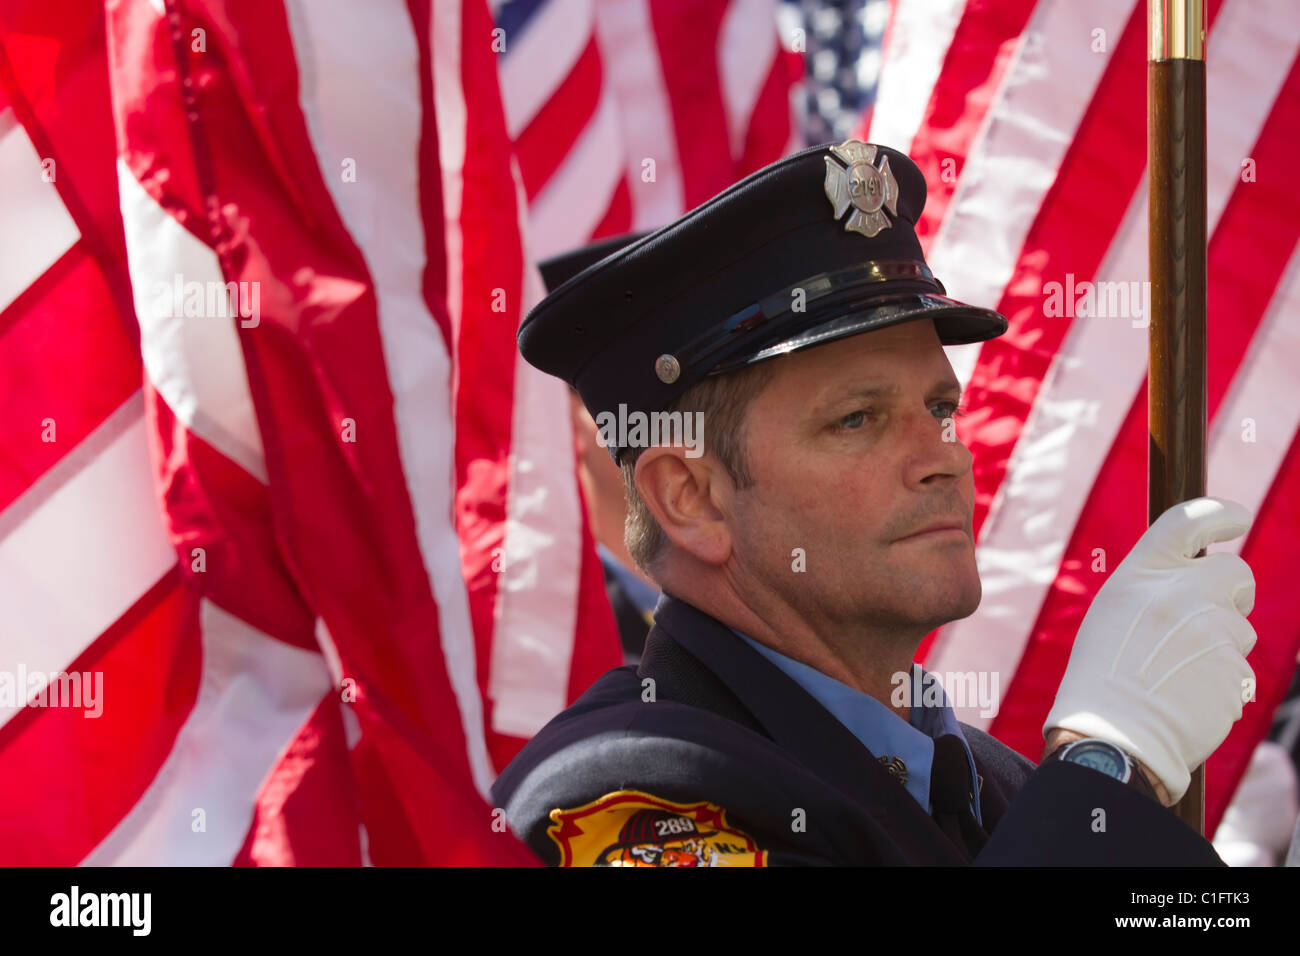 Firefighter from the 343 Honor Company honoring the firefighters who lost their lives on 9/11/2001 carrying an American flag Stock Photo